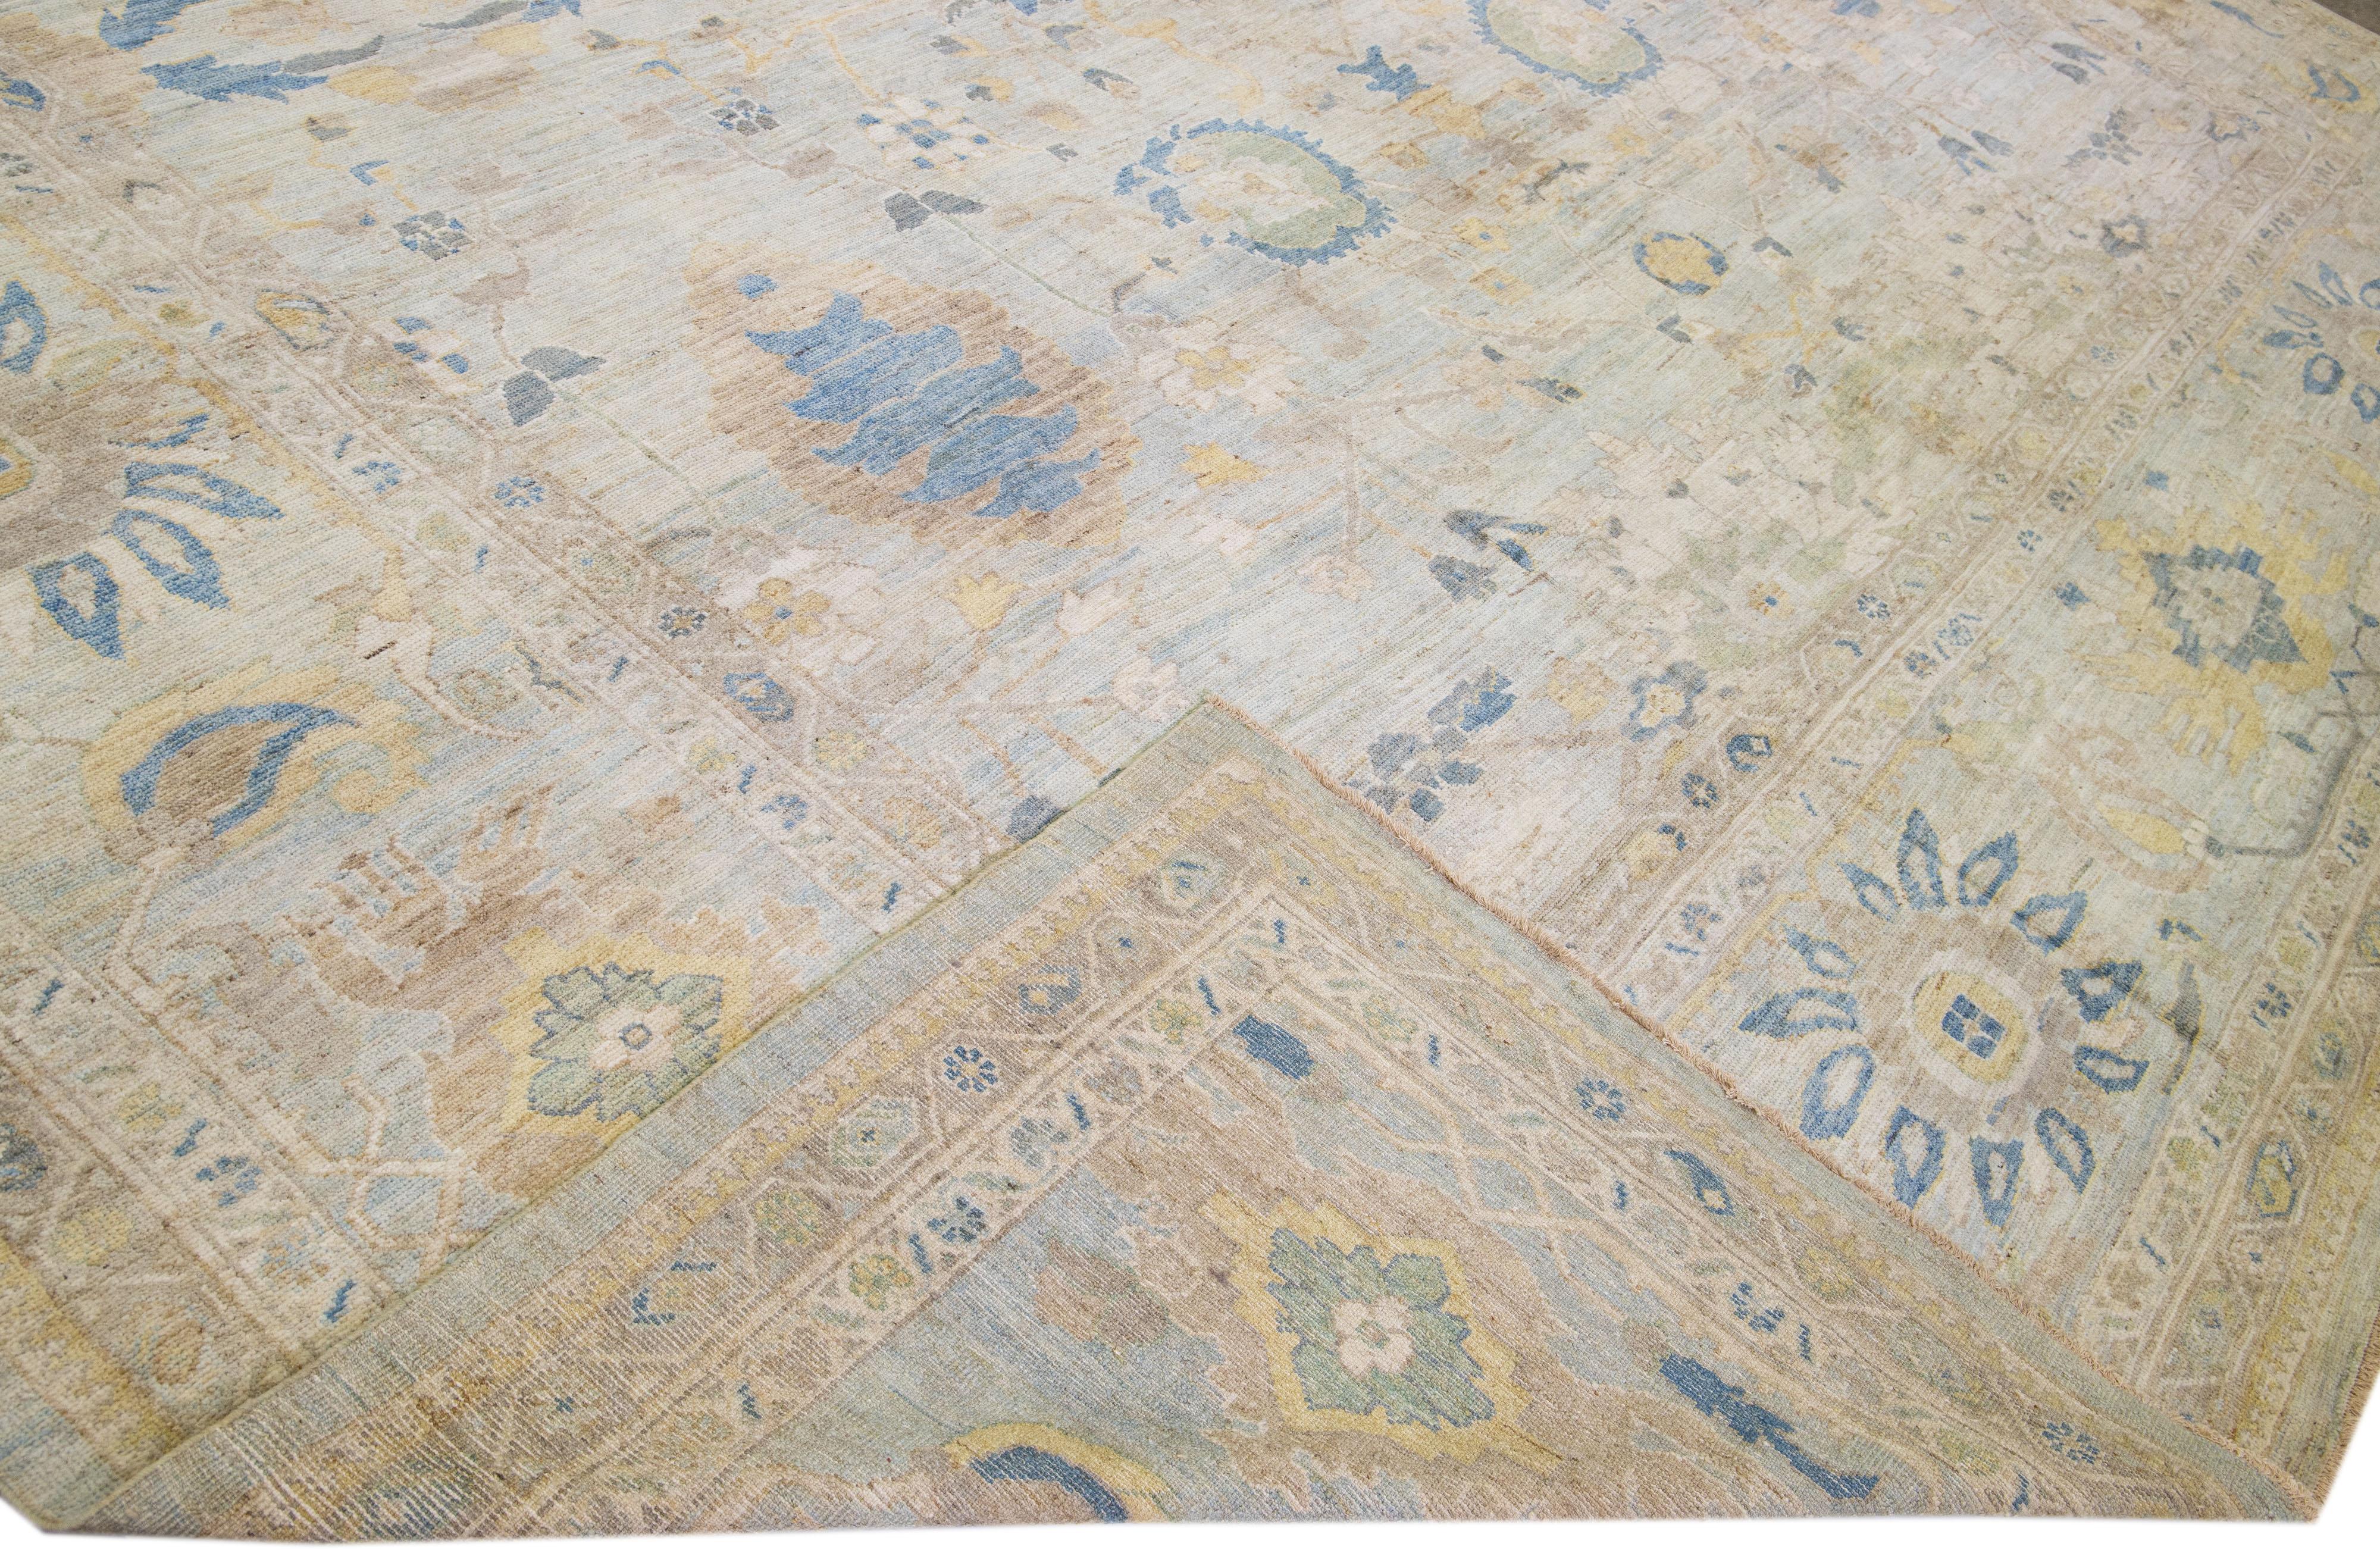 Beautiful modern Sultanabad hand-knotted oversize wool rug with a light blue color field. This rug has brown and beige accents in a gorgeous all-over floral design.

This rug measures: 16'6